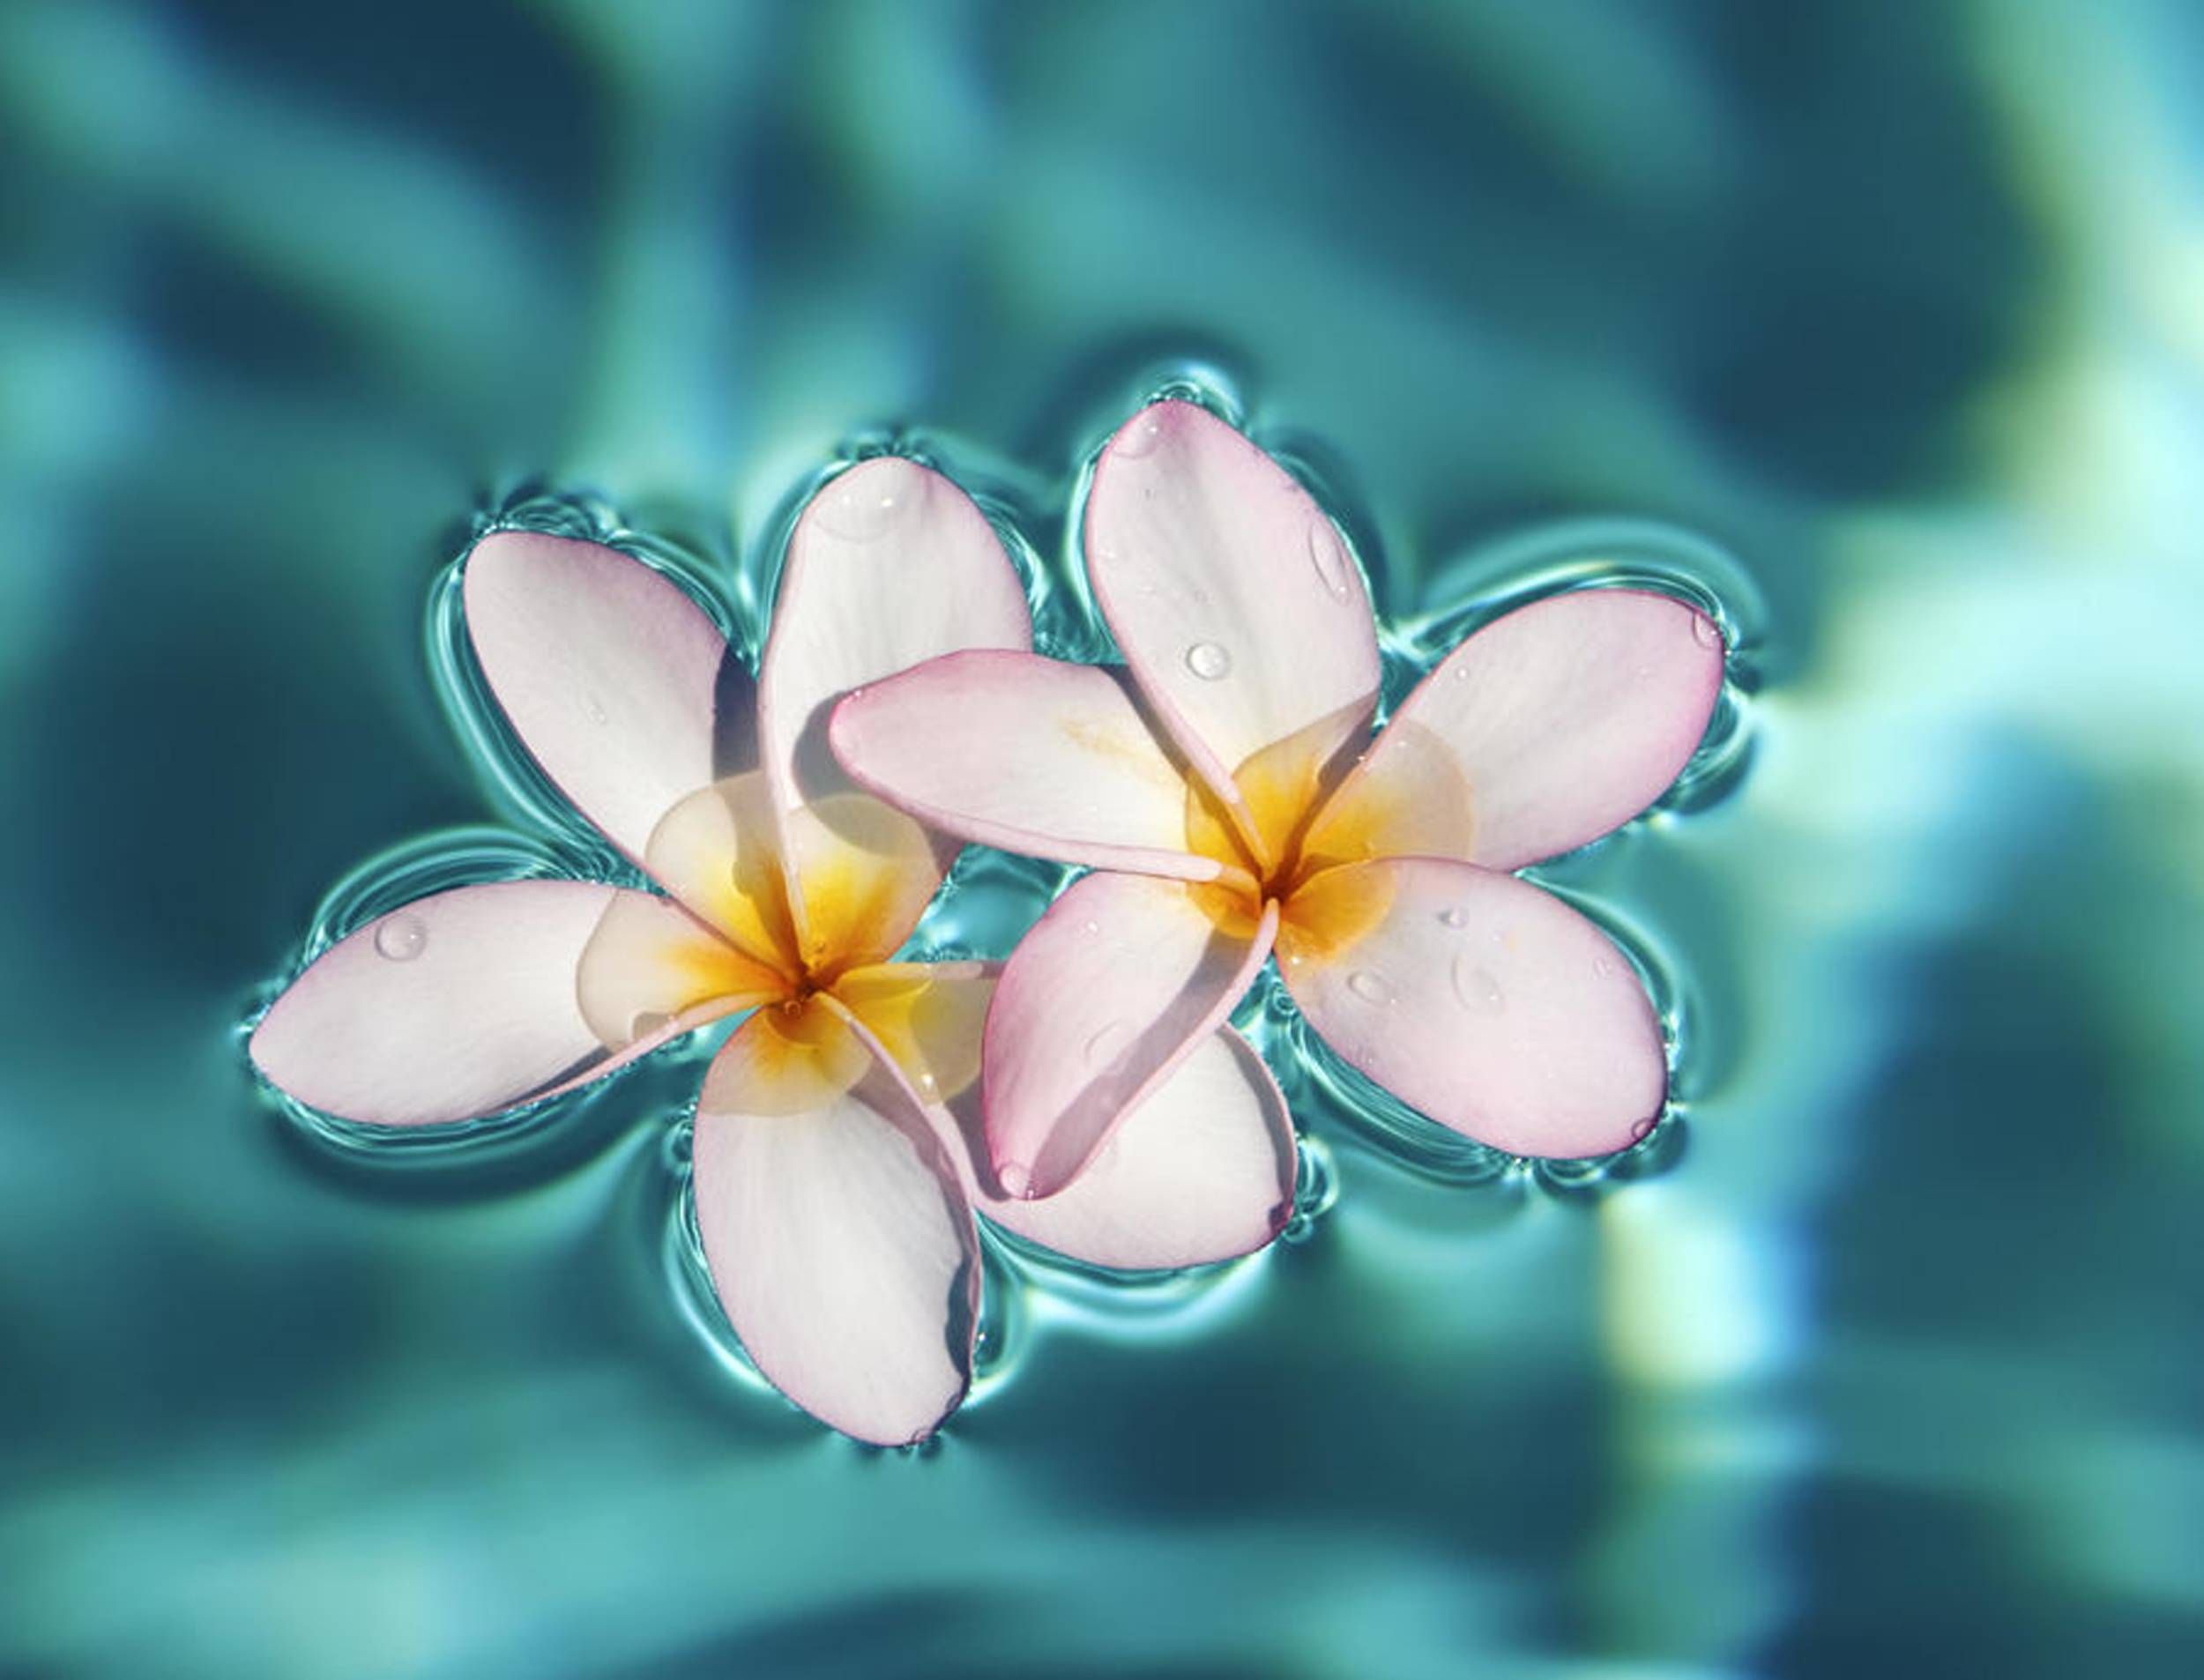 Tropical Flower Wallpapers